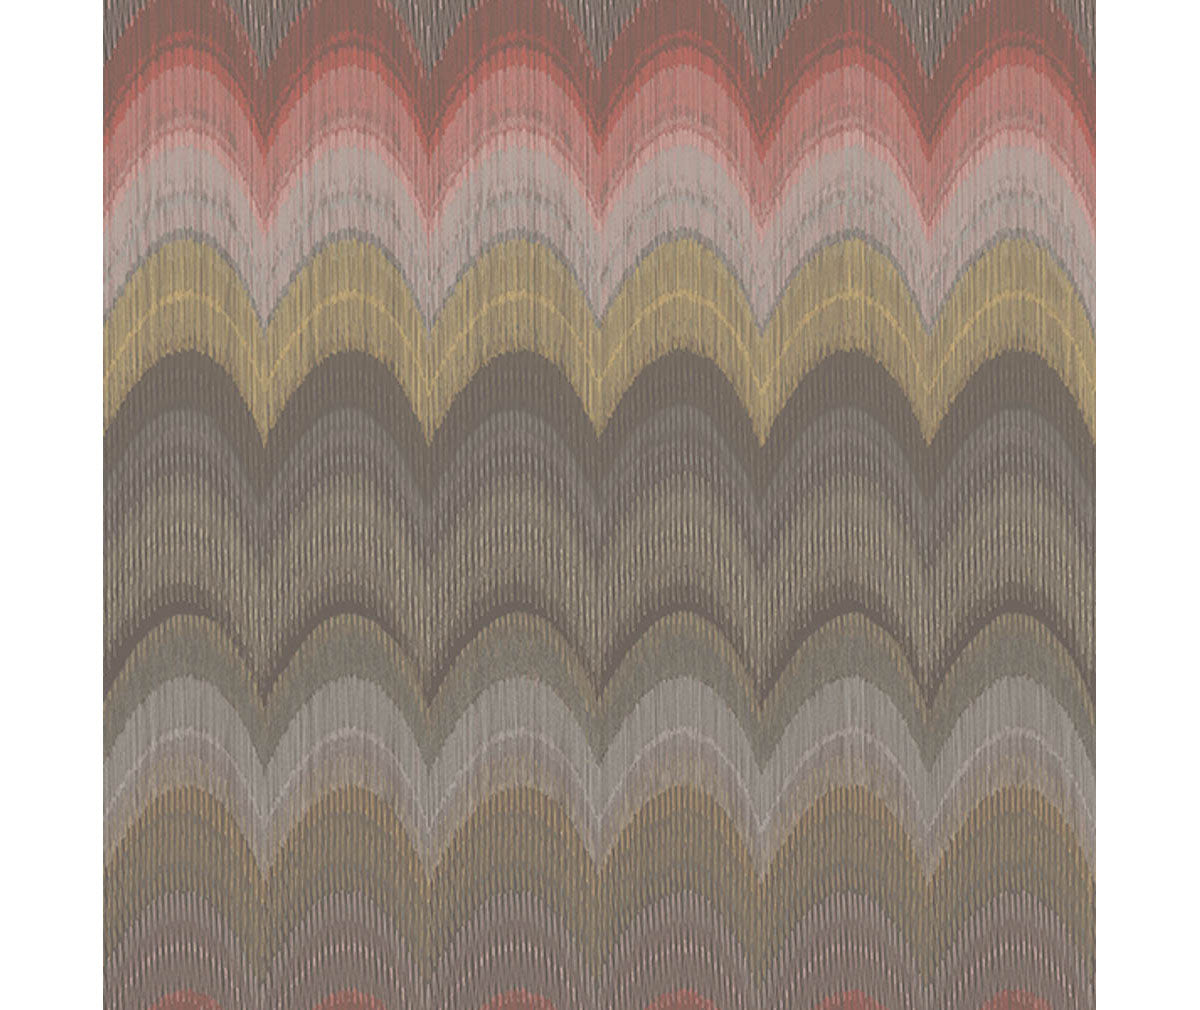 August Brown Wave Wallpaper available at Barrydowne Paint